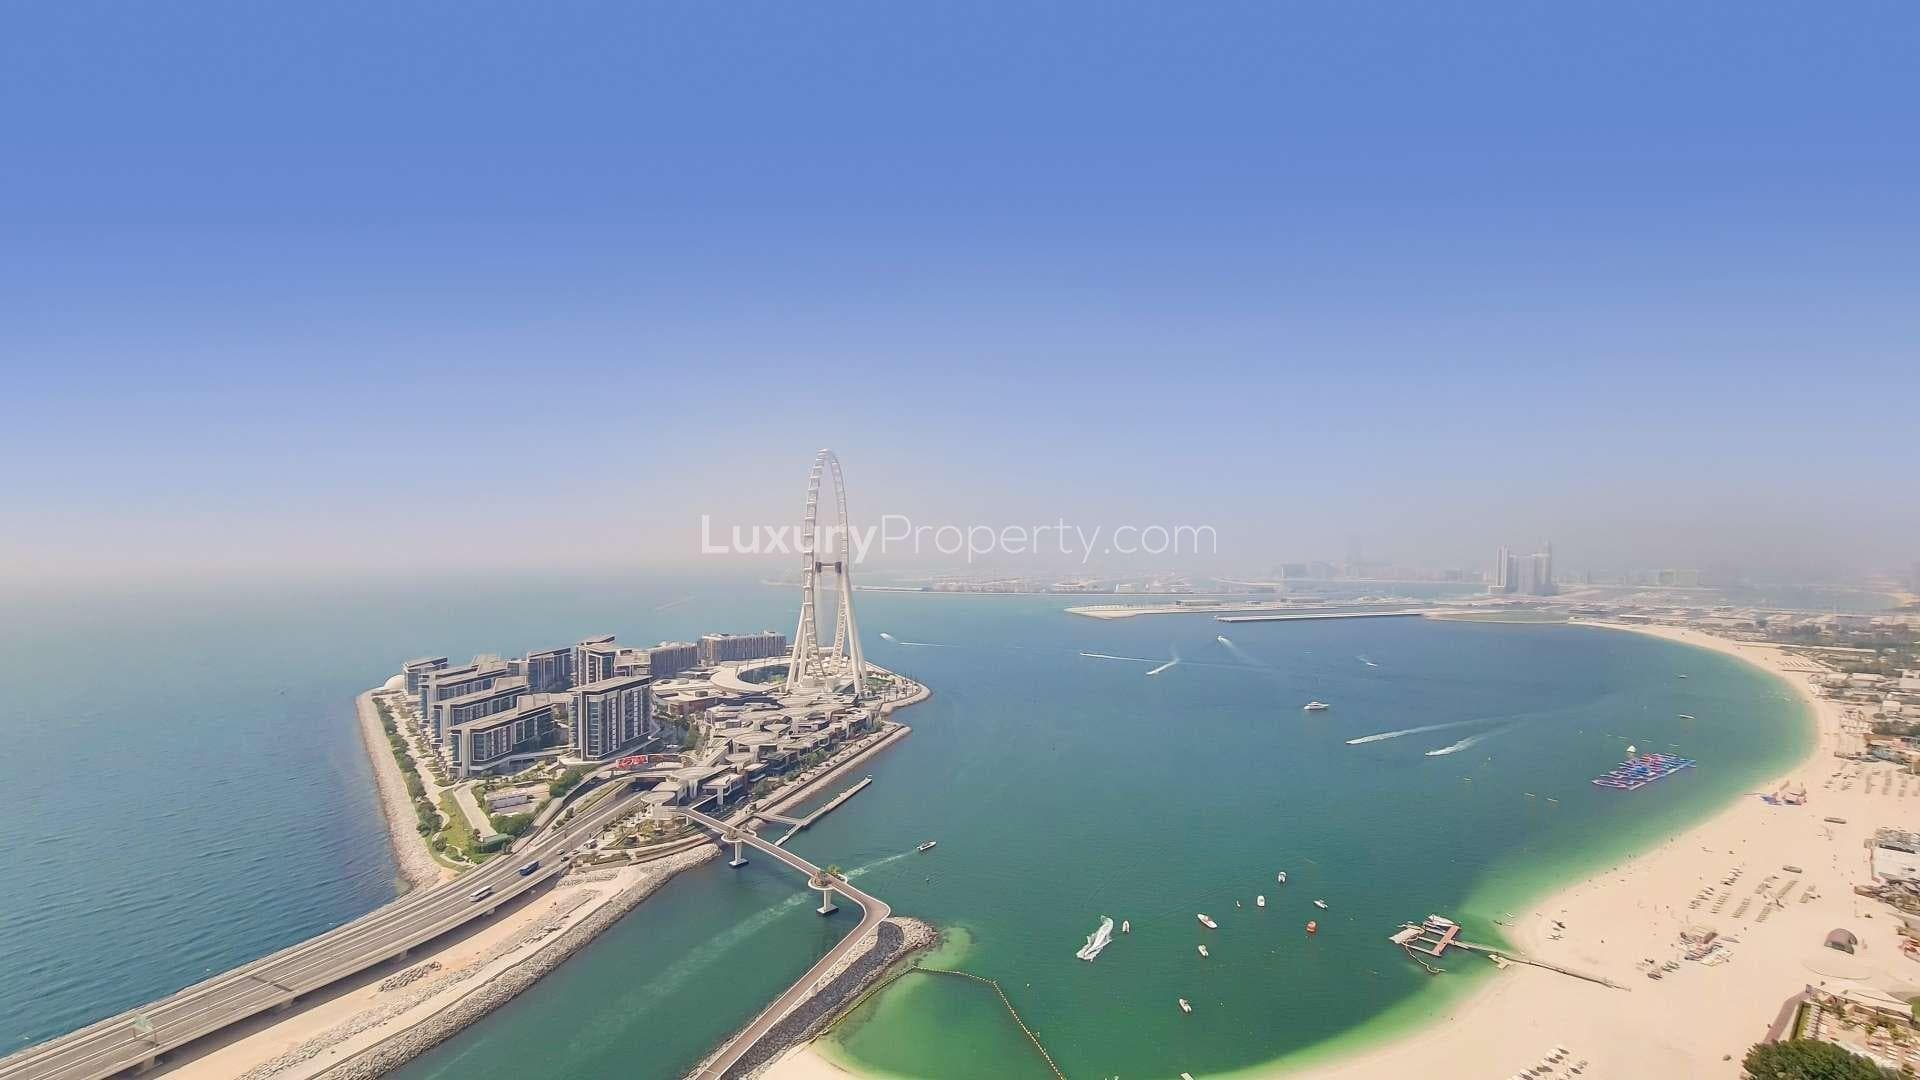 3 Bedroom Apartment For Rent The Address Jumeirah Resort And Spa Lp20076 30e0086f1e3db800.jpg